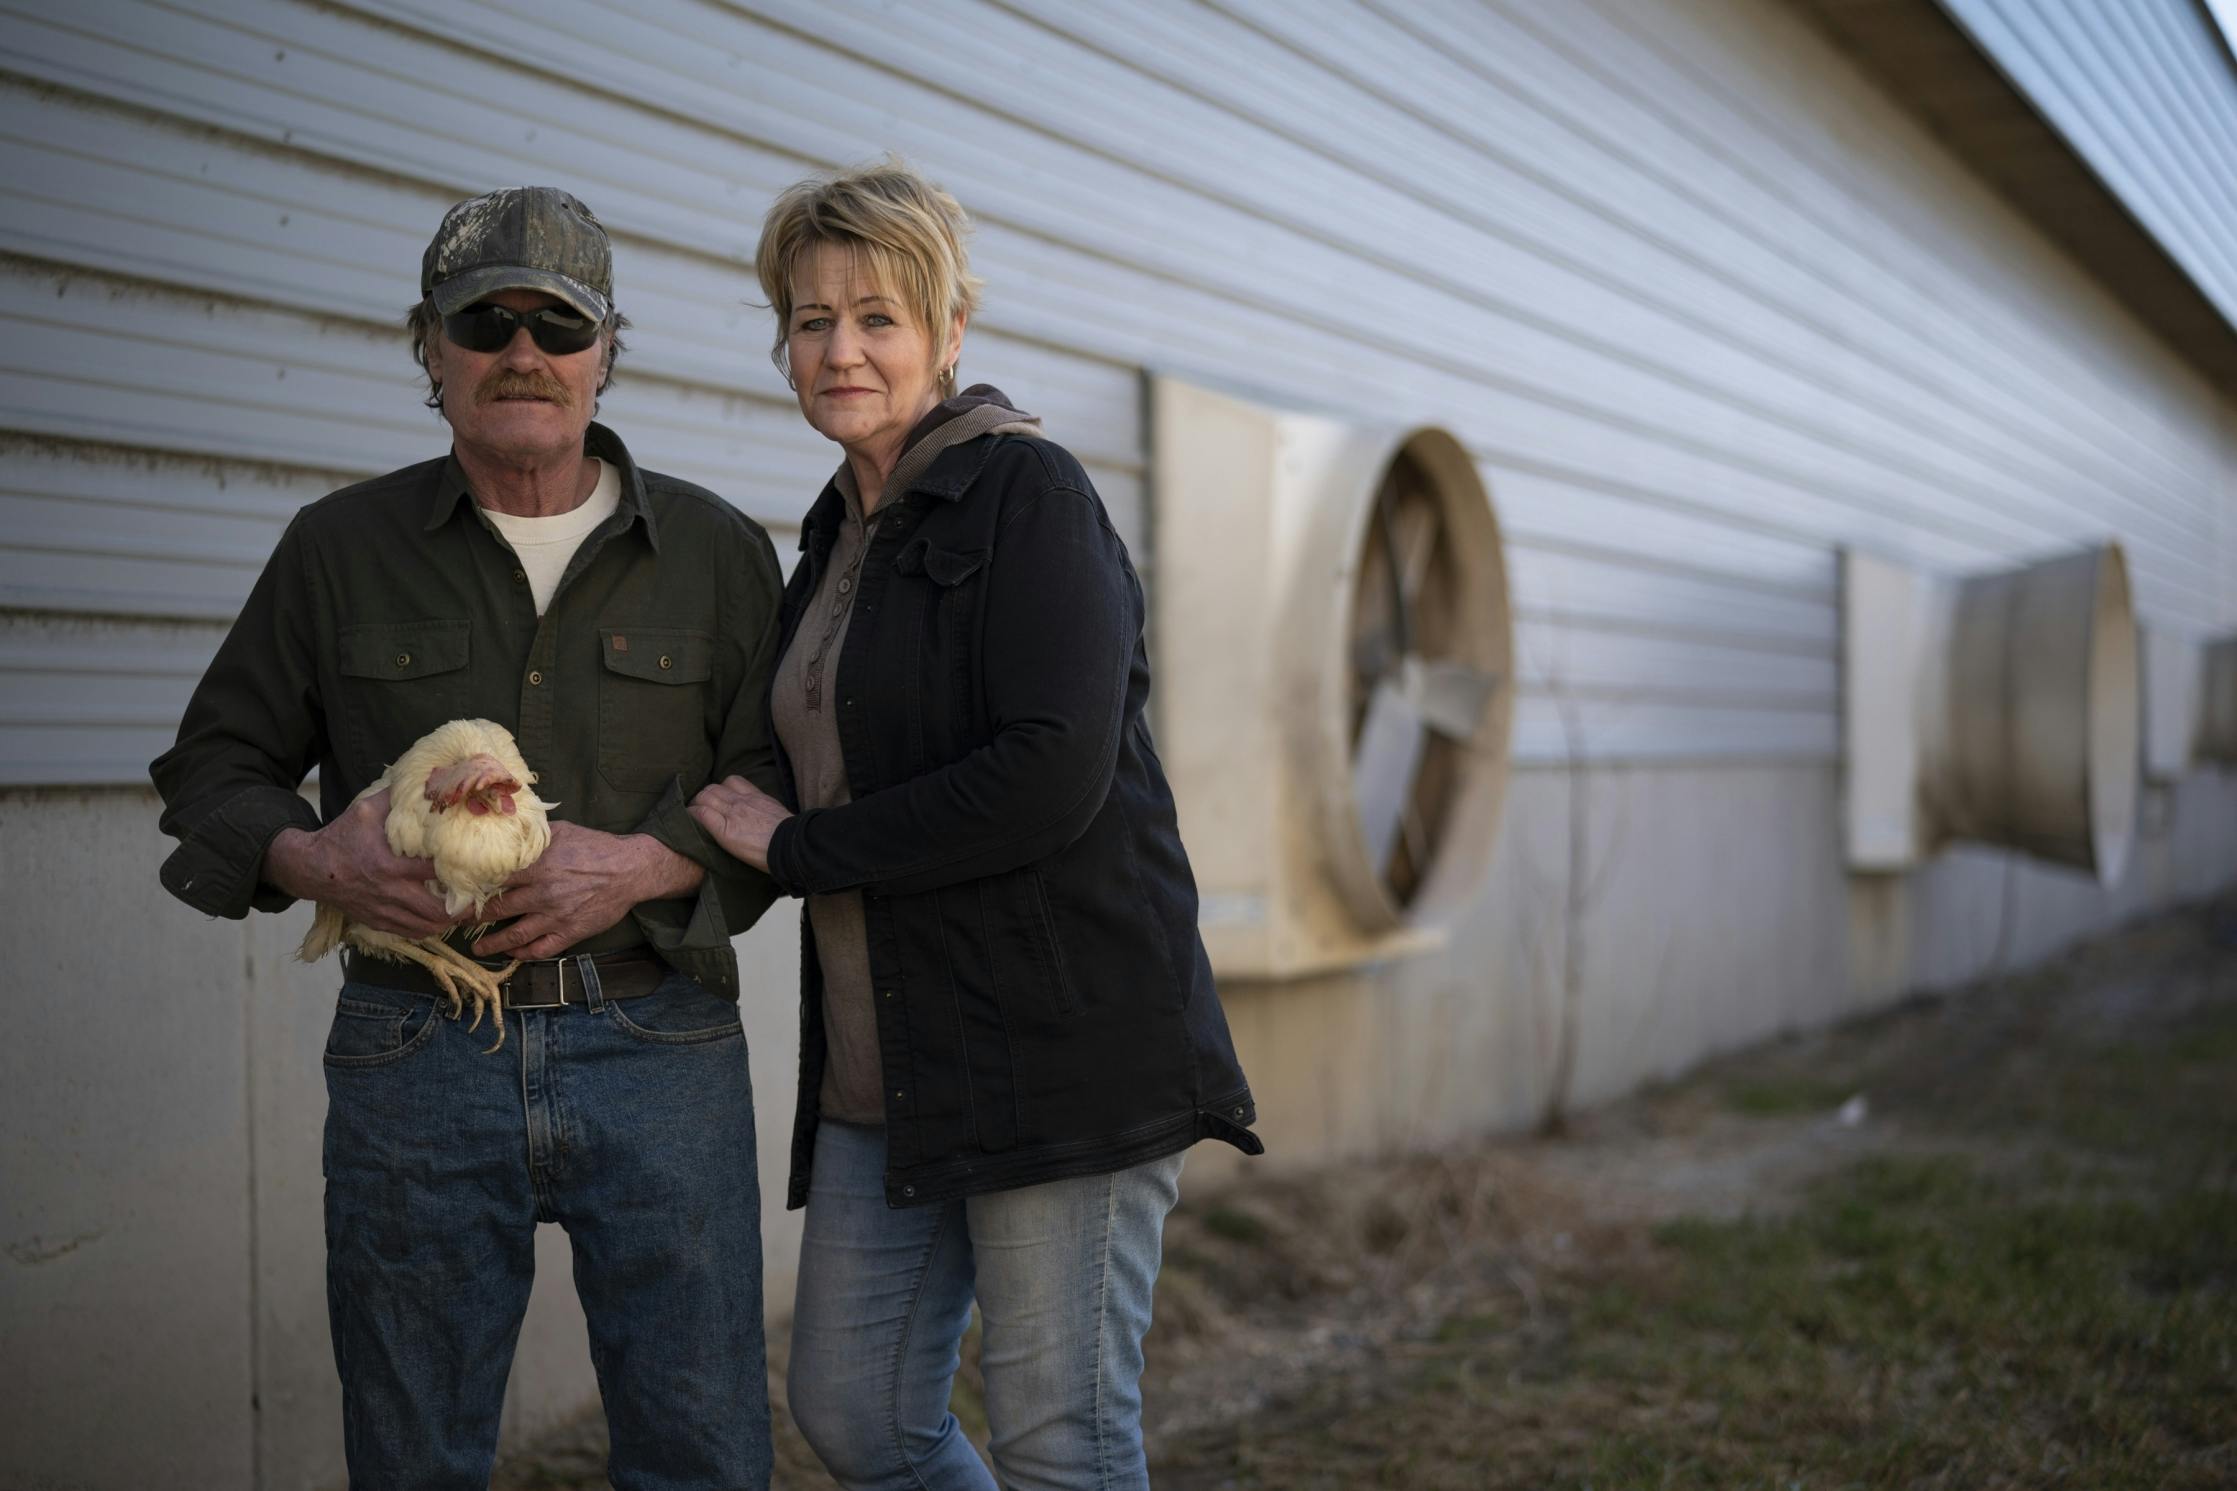 Egg demand shifted, and 61,000 Minnesota chickens were euthanized